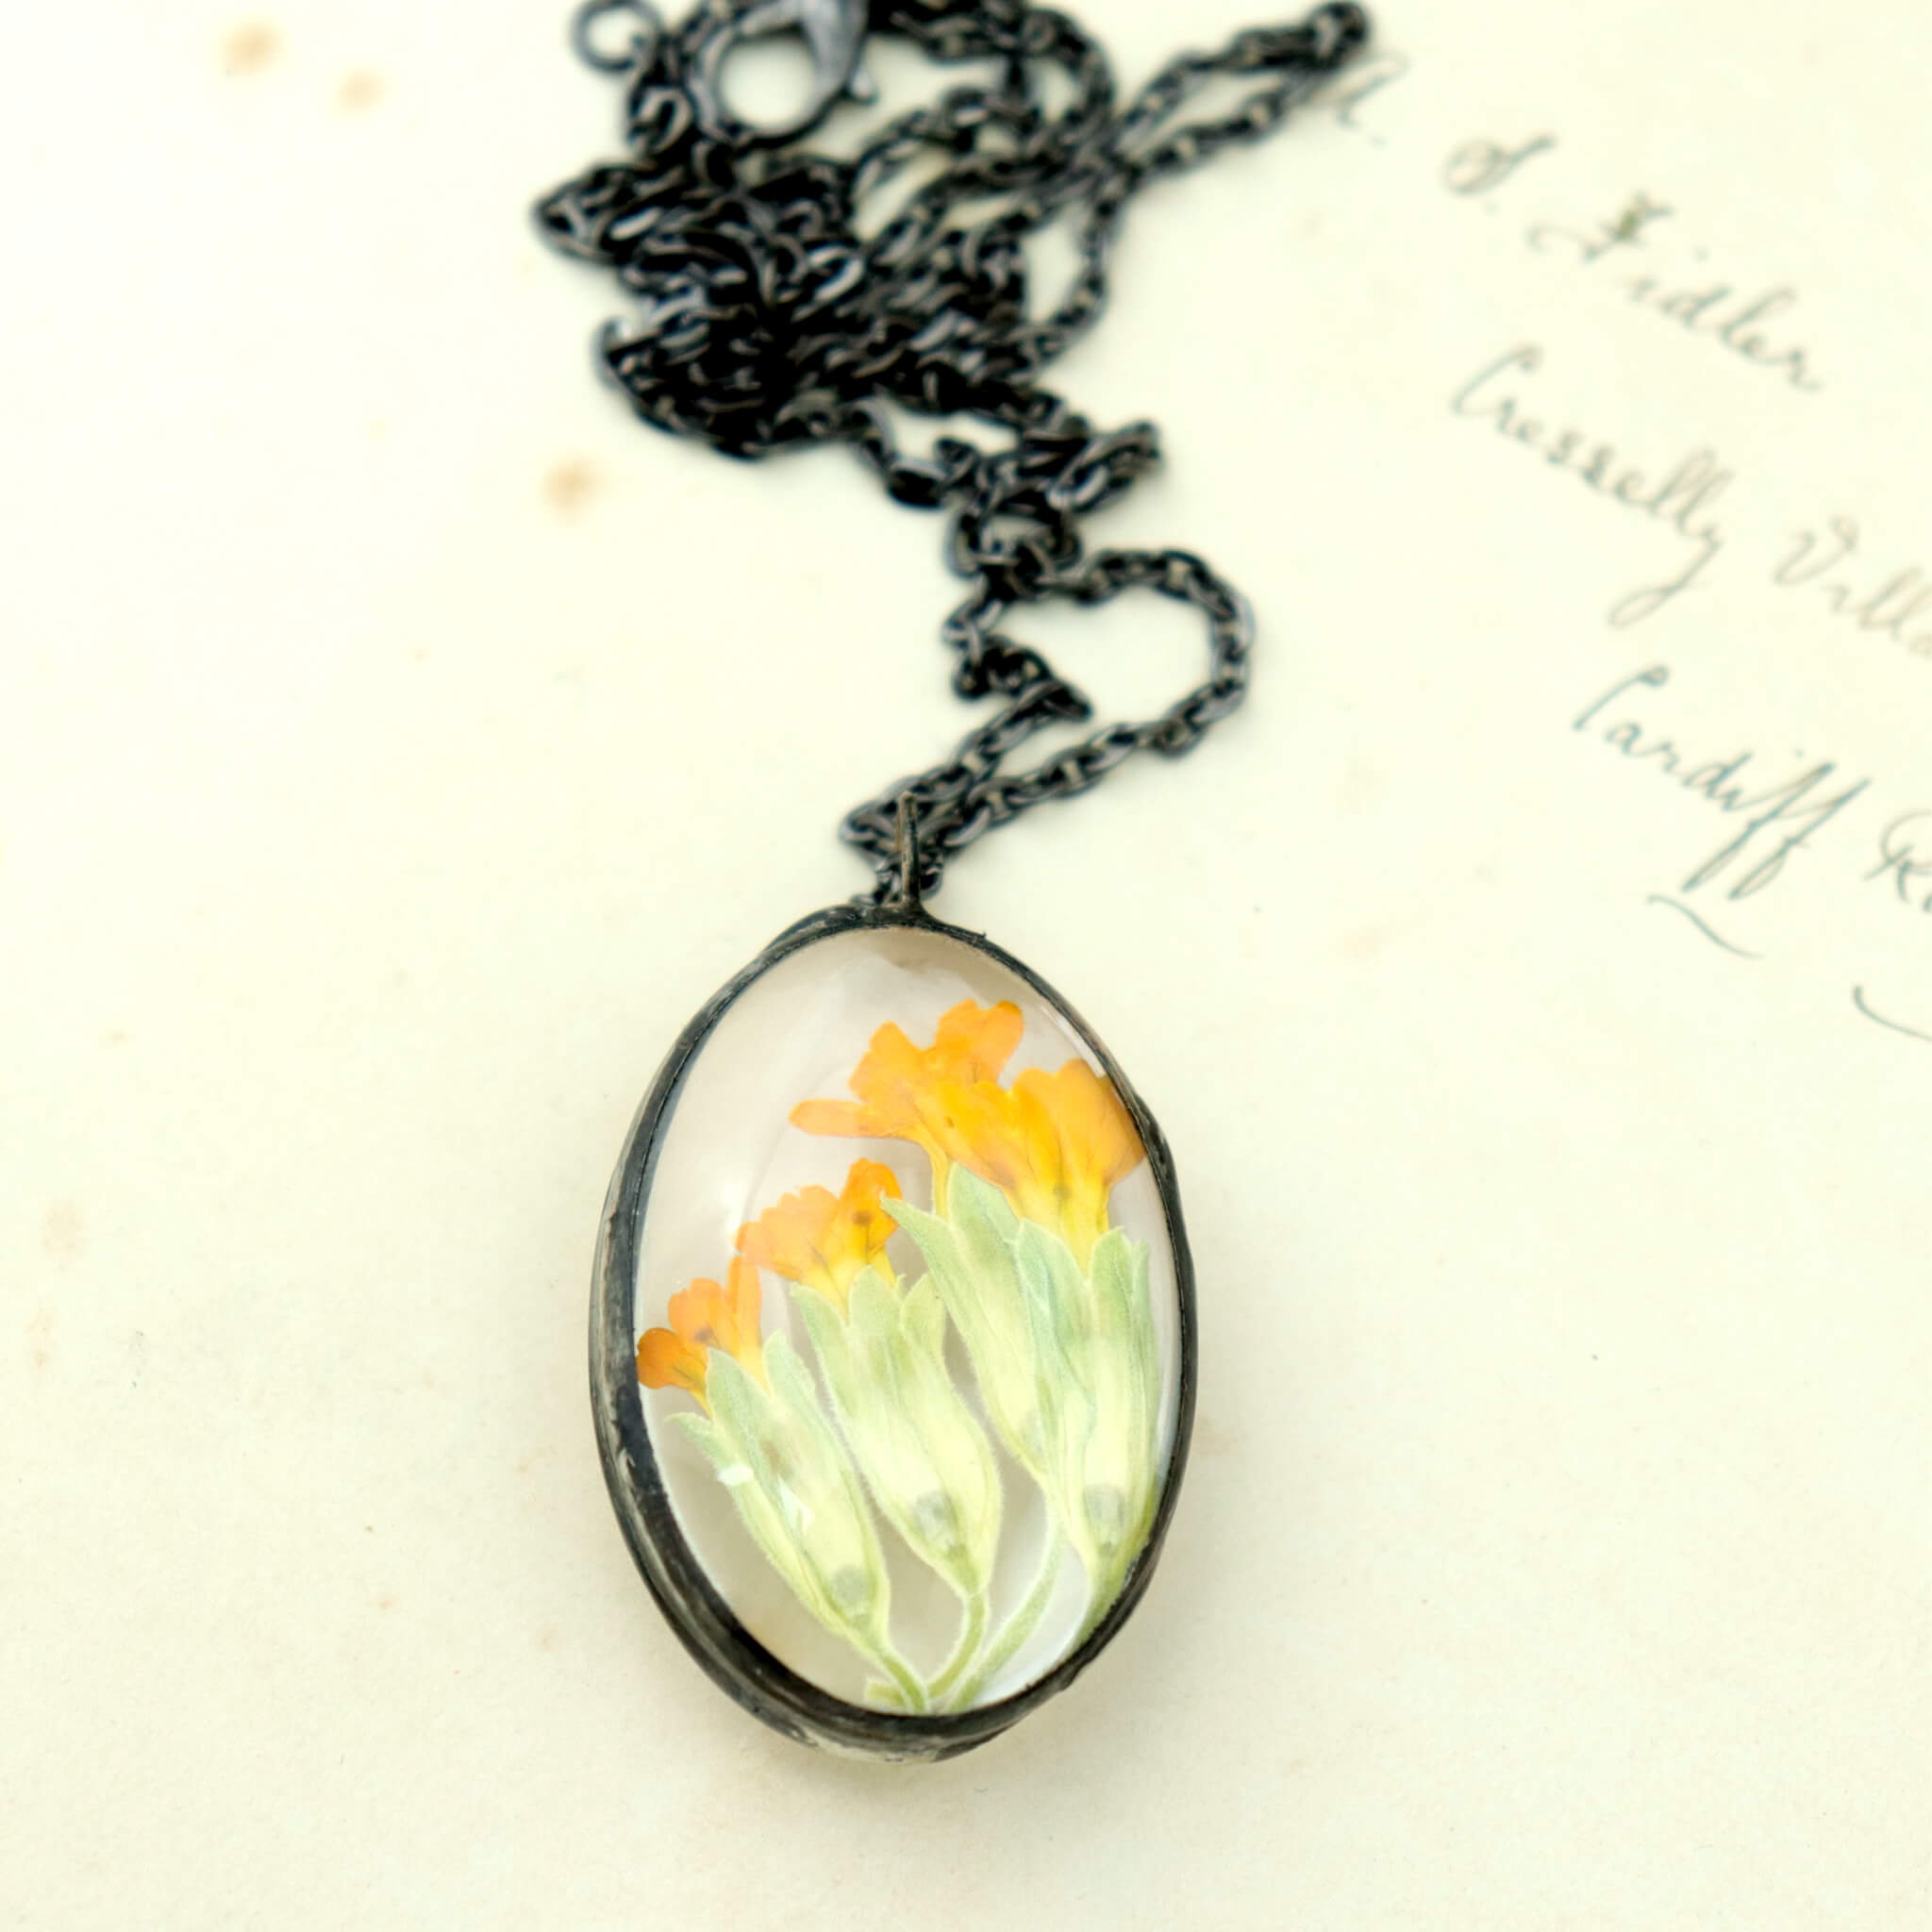 Primroses in soldered glass necklace lying on an old letter